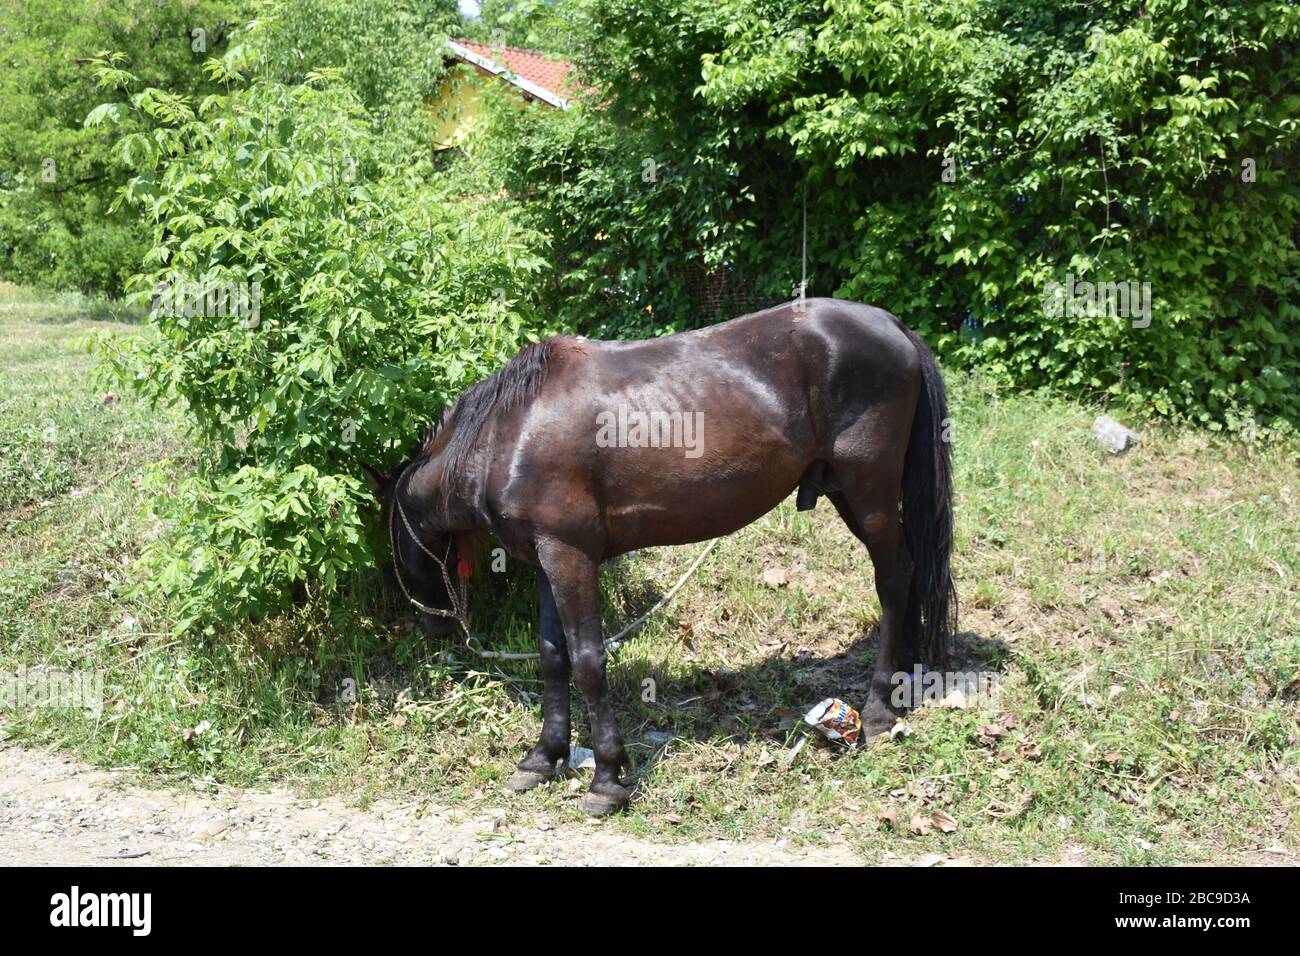 The horse has reins and is tied to a tree. He lowered his nostrils to the base of the green bush Stock Photo